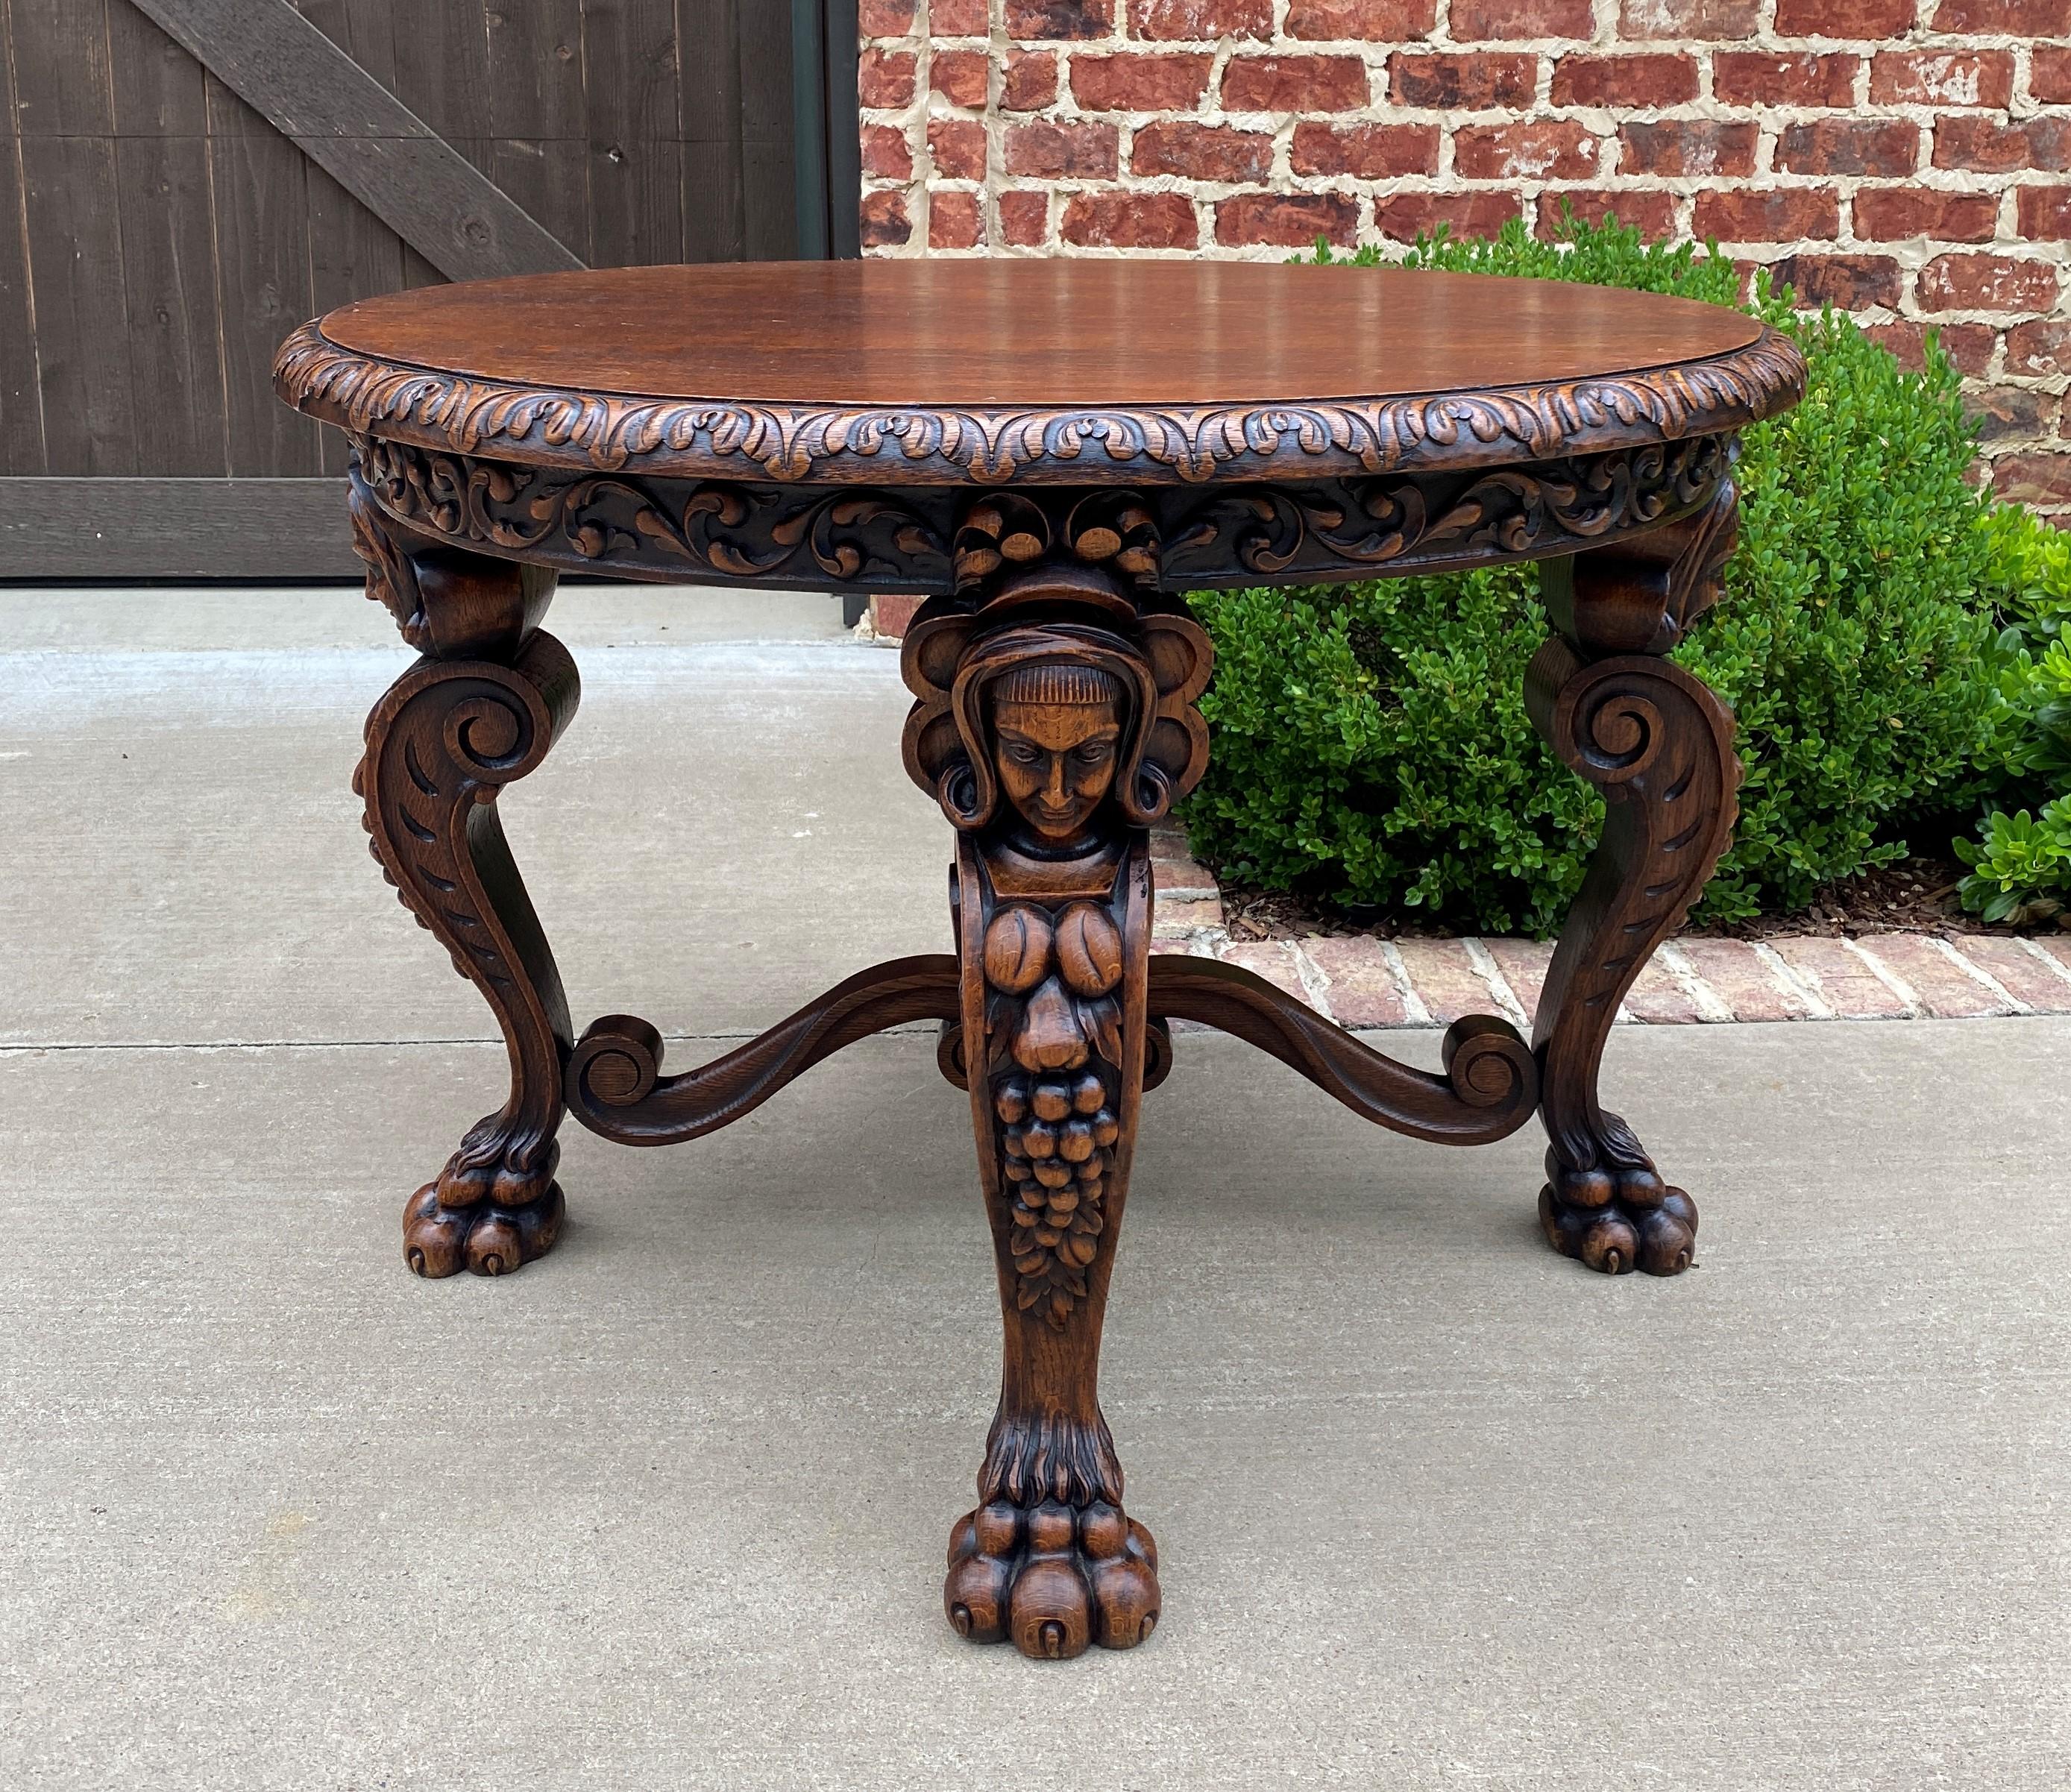 Superb highly carved late 19th century antique oak round entry, coffee, sofa, center, parlor or end table ~~Victorian Era Renaissance Revival
~~c. 1890s

These versatile tables were very popular in late Victorian era French country homes and